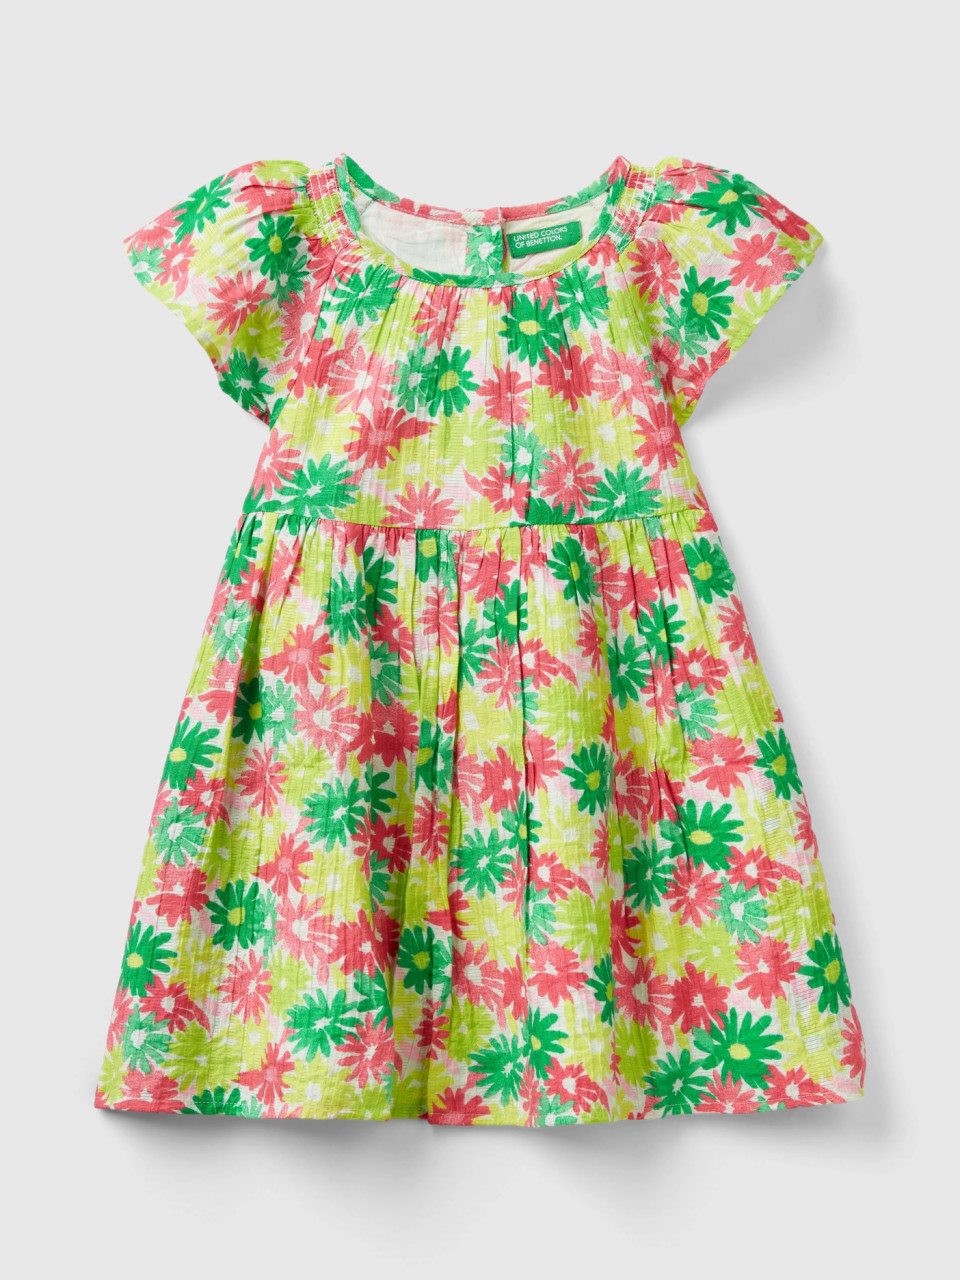 Benetton, Dress With Floral Print, Multi-color, Kids